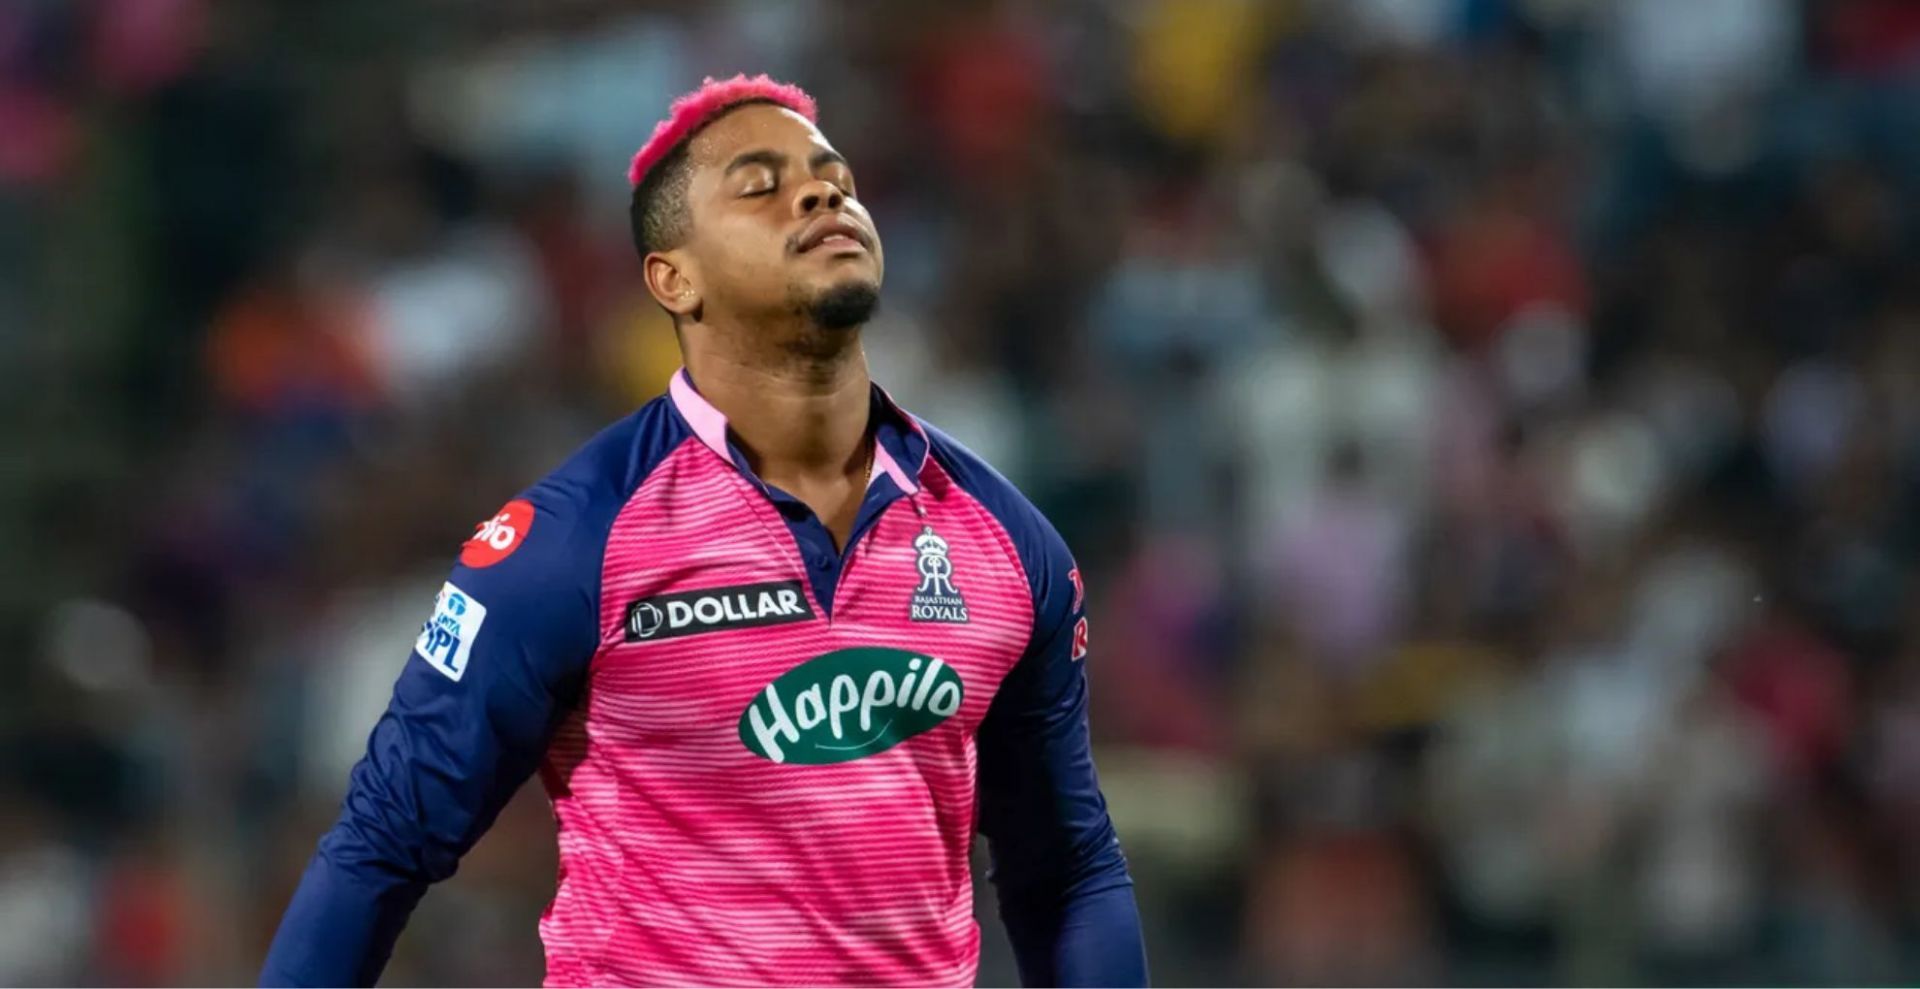 Shimron Hetmyer had traveled back to West Indies for the birth of his first child (Credit: BCCI/IPL)